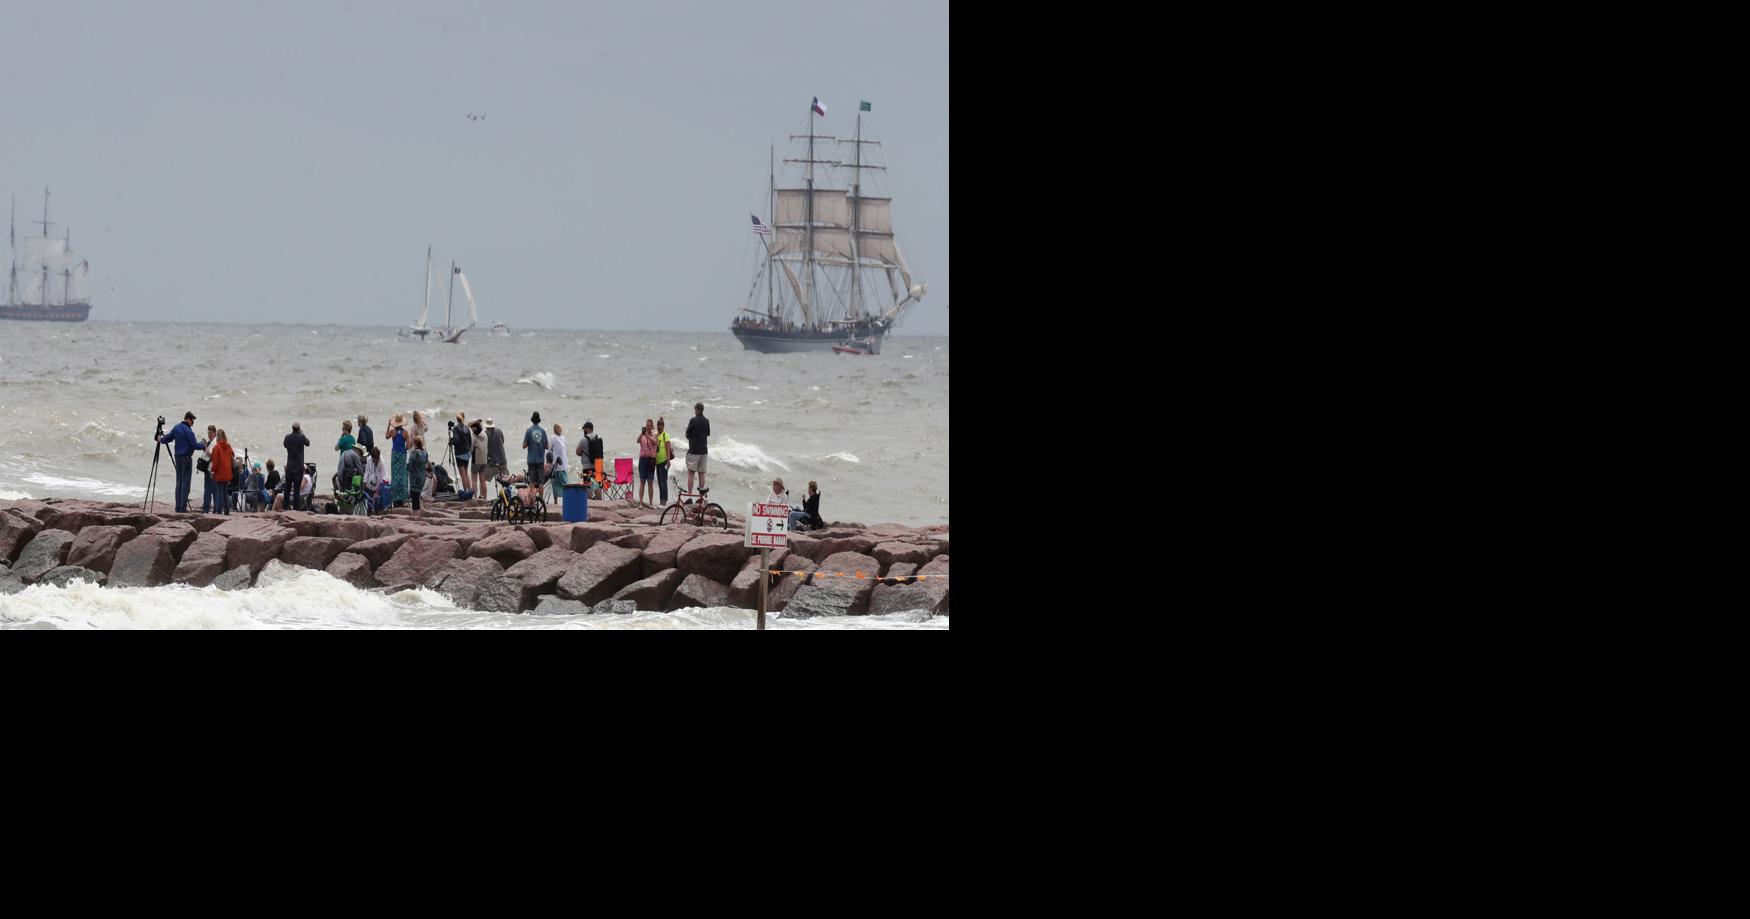 Tall ships sail to Galveston for weekend festival Local News The